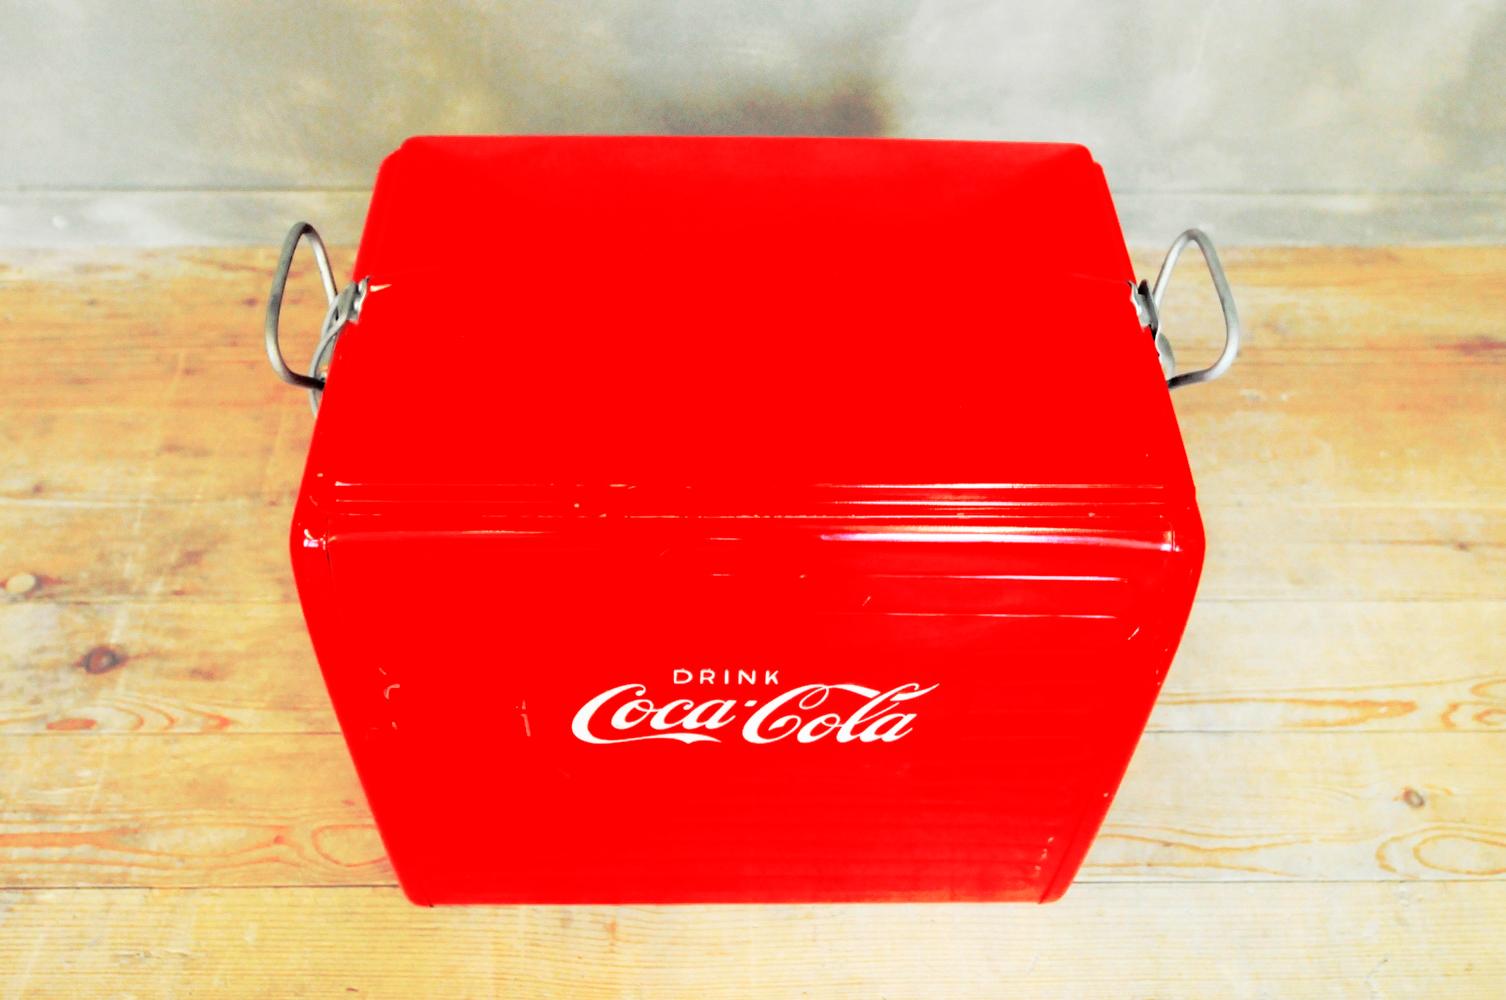 This Coca Cola cooler was bought in the USA in the 1950s or 1960s and brought to Europe. The aluminum box is meant to be filled with ice cubes to keep drinks cool. The top clamps shut.